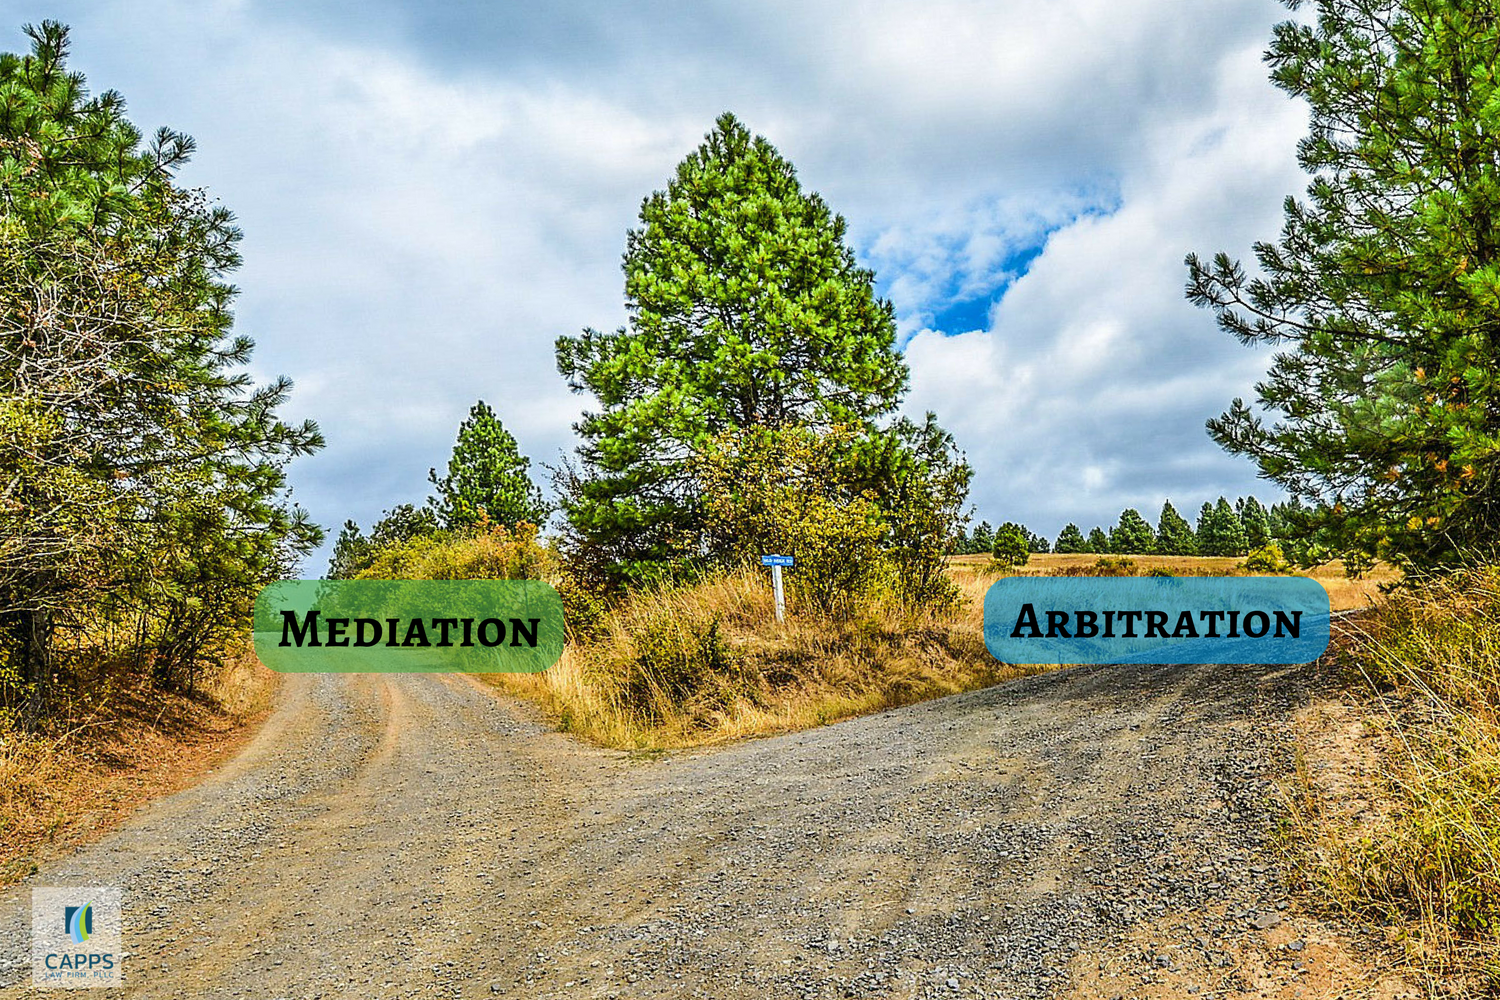 Mediation, Arbitration, fork in the road, legal decisions, austin divorce attorney, kelly J. capps, erin C. leake, mediation attorney